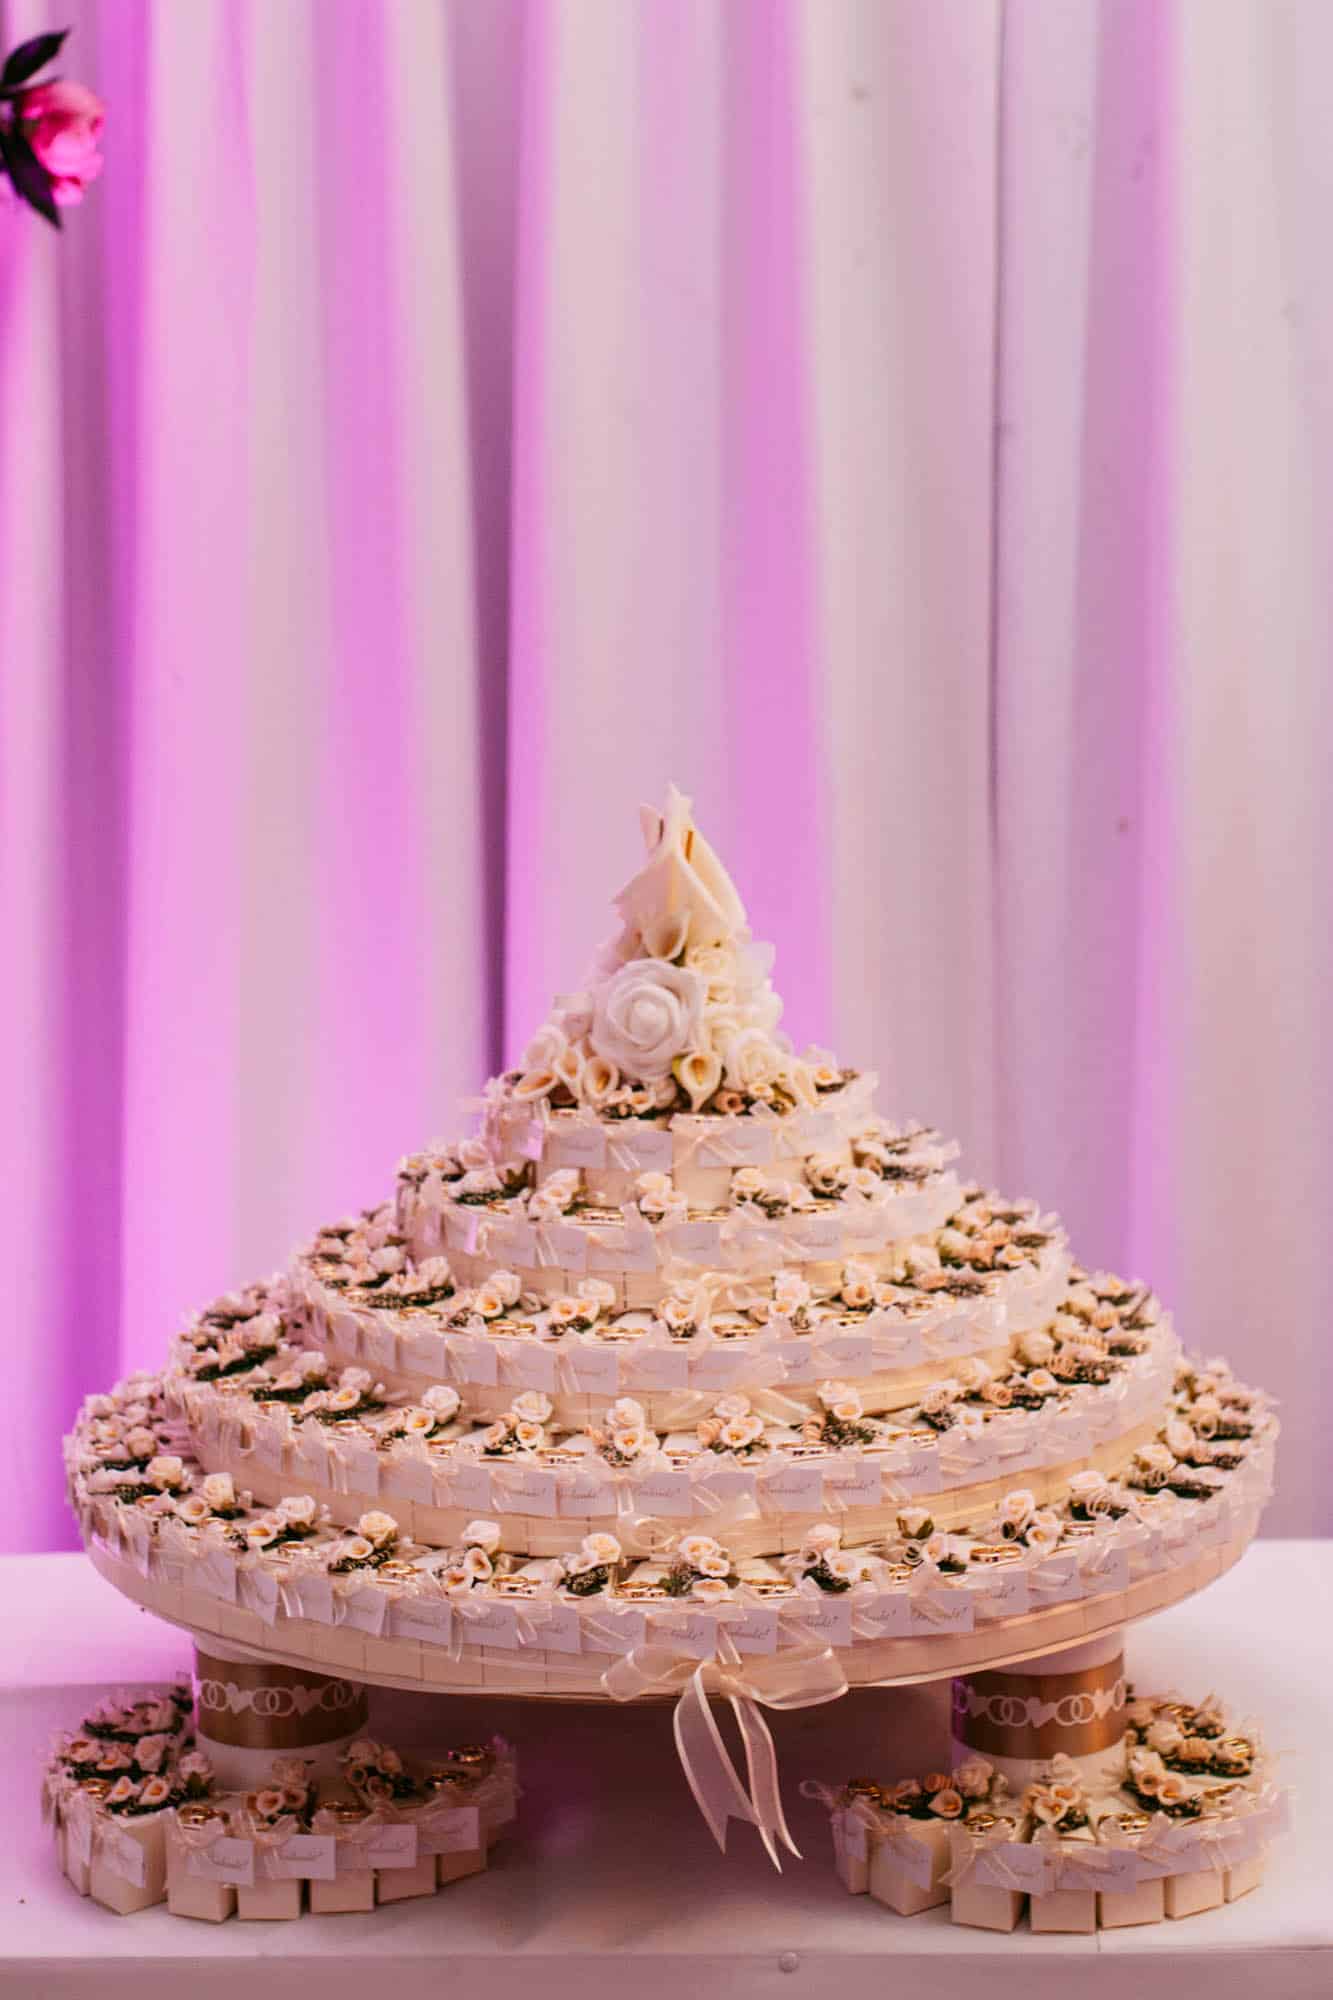 A wedding cake sits atop a table.